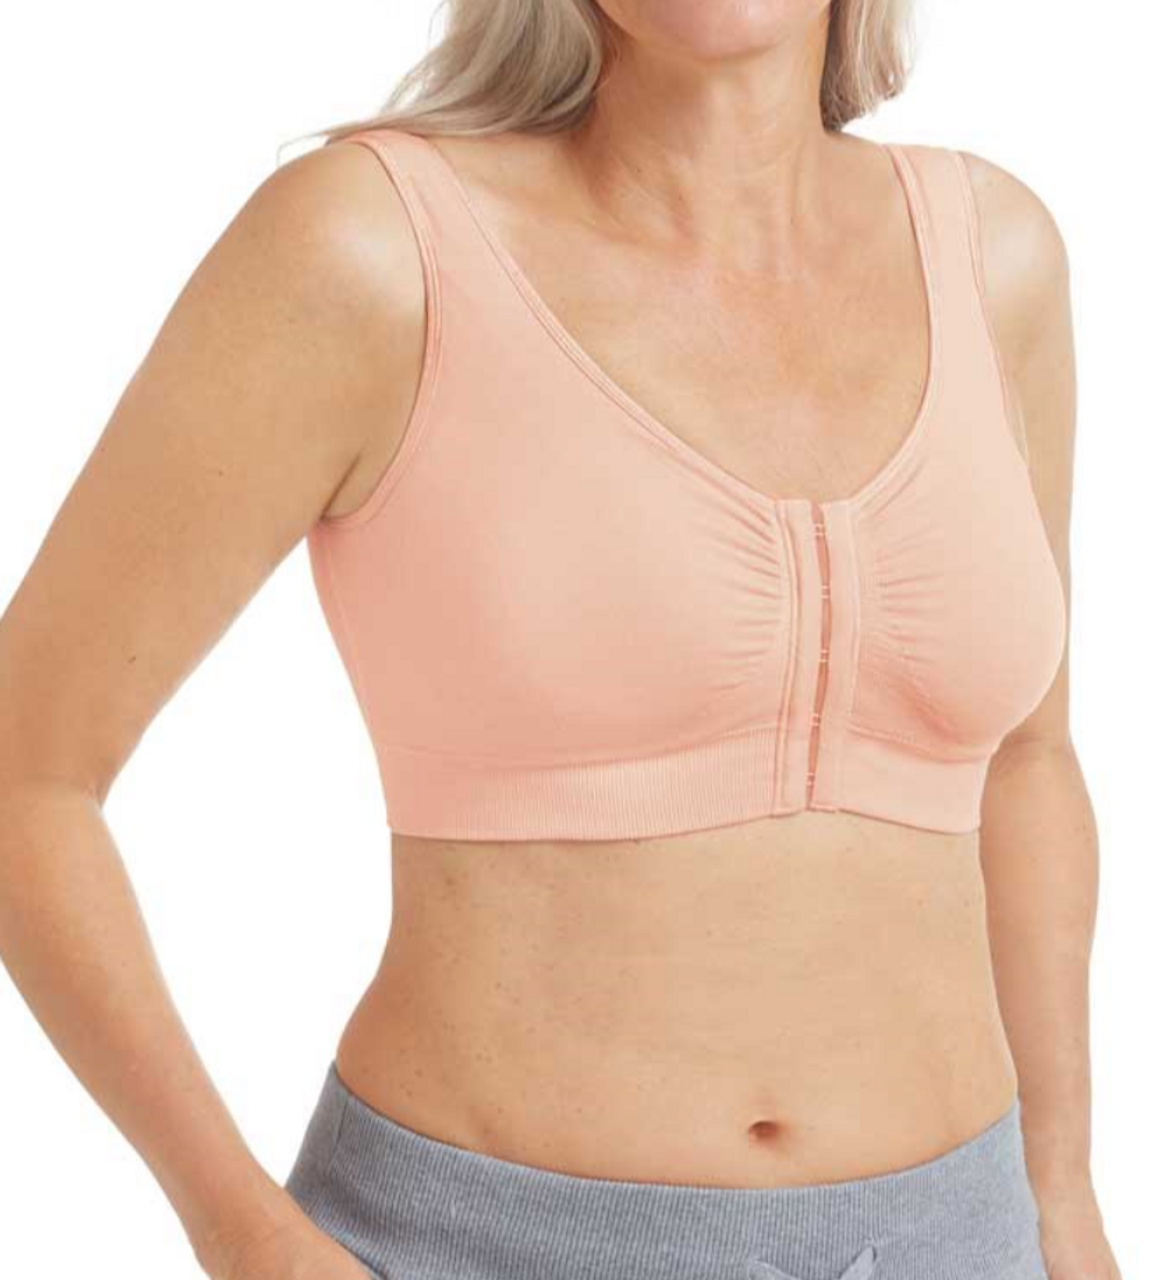 TOSOFT Postpartum Recovery Bras for Women High Compression Push Up Sculpting  Camisole Bra Underwear with 8-Row Buckles (Color : Beige, Size : 75/34B) at   Women's Clothing store